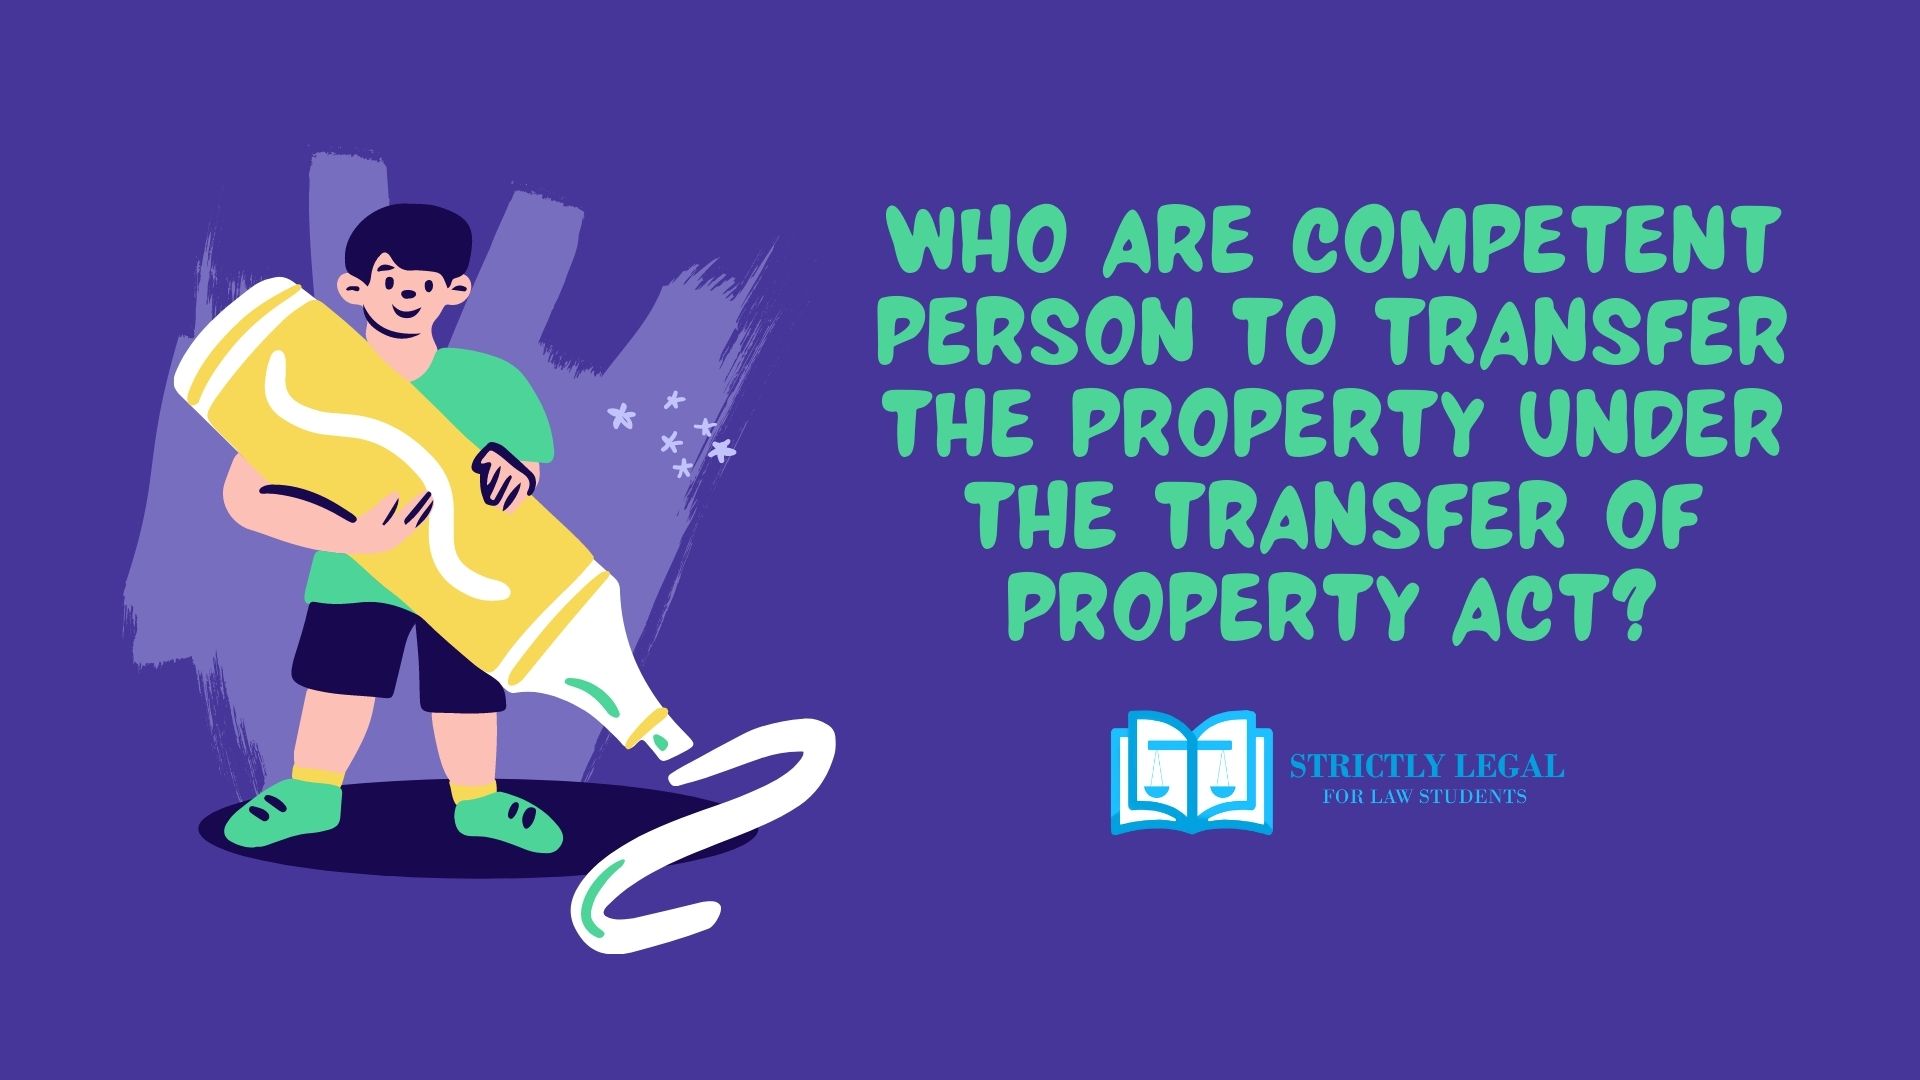 Everything about gifts under Transfer of Property Act